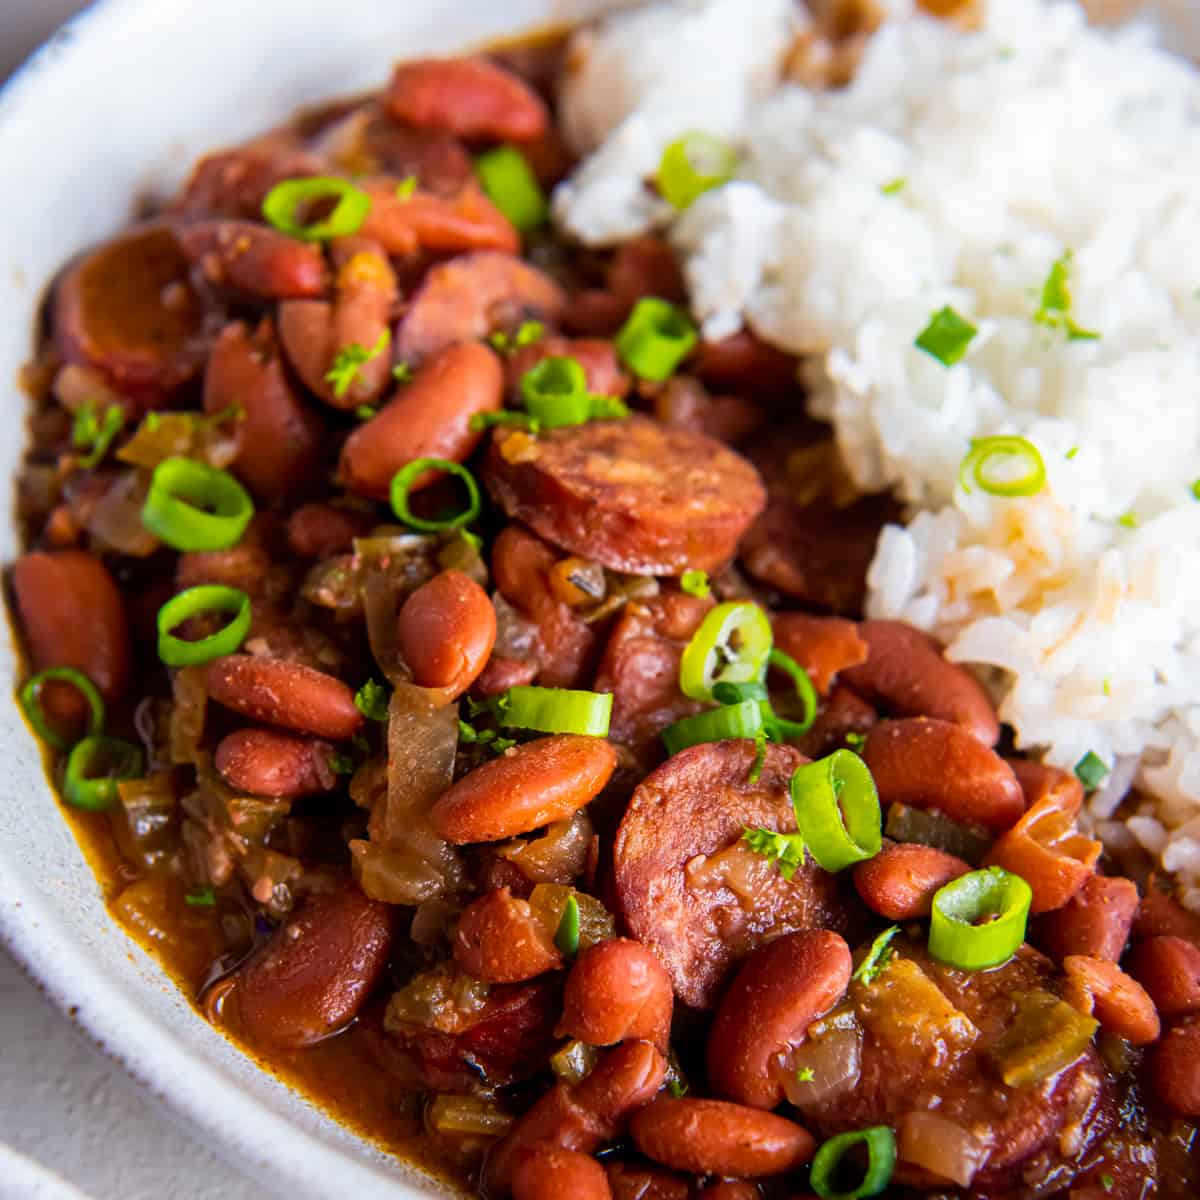 https://www.thecookierookie.com/wp-content/uploads/2022/05/Featured-crockpot-red-beans-and-rice-1.jpg